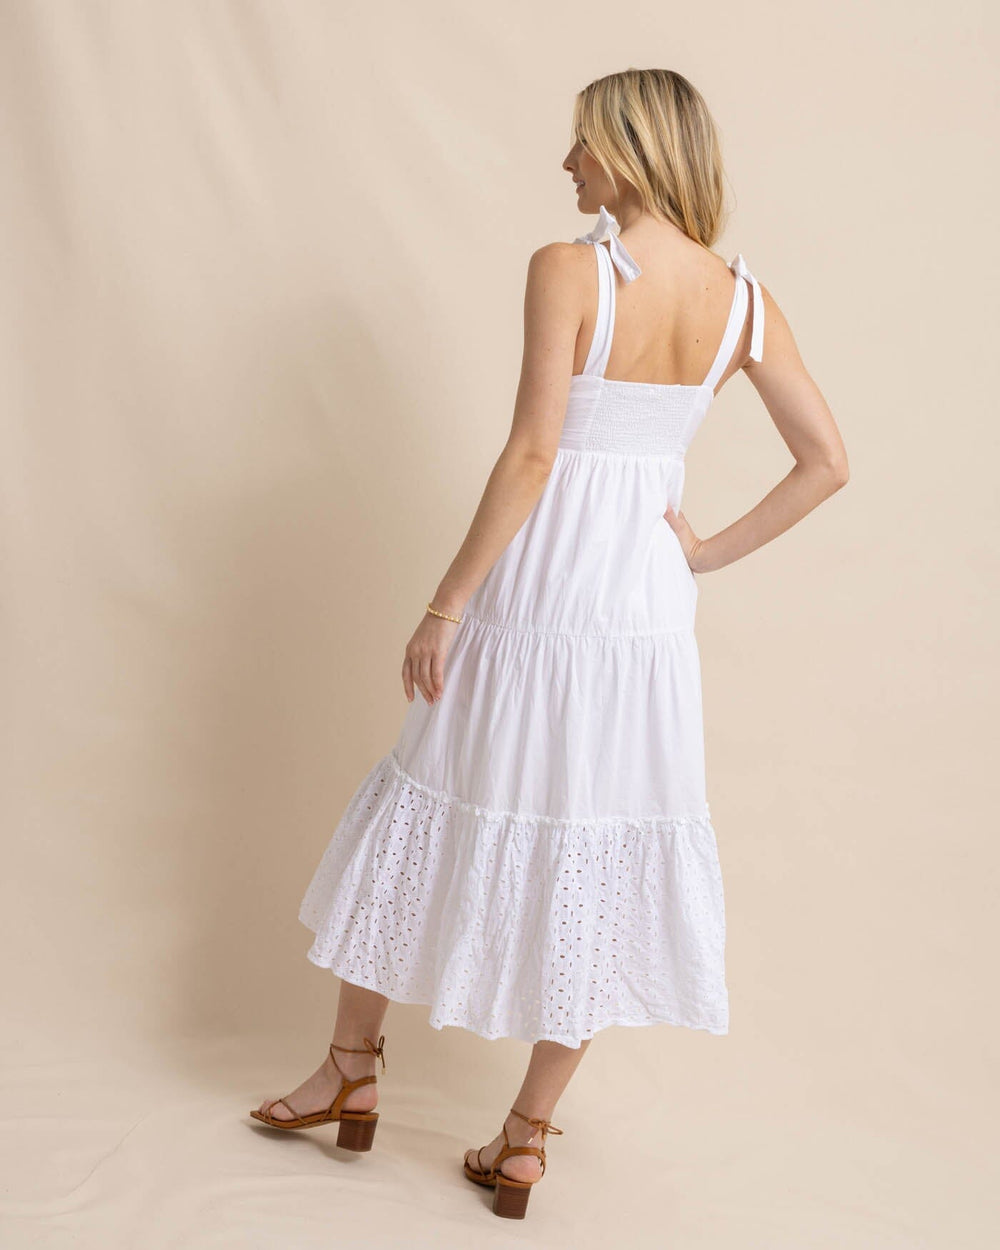 The back view of the Southern Tide Sylvie with Eyelet Maxi Dress by Southern Tide - Classic White